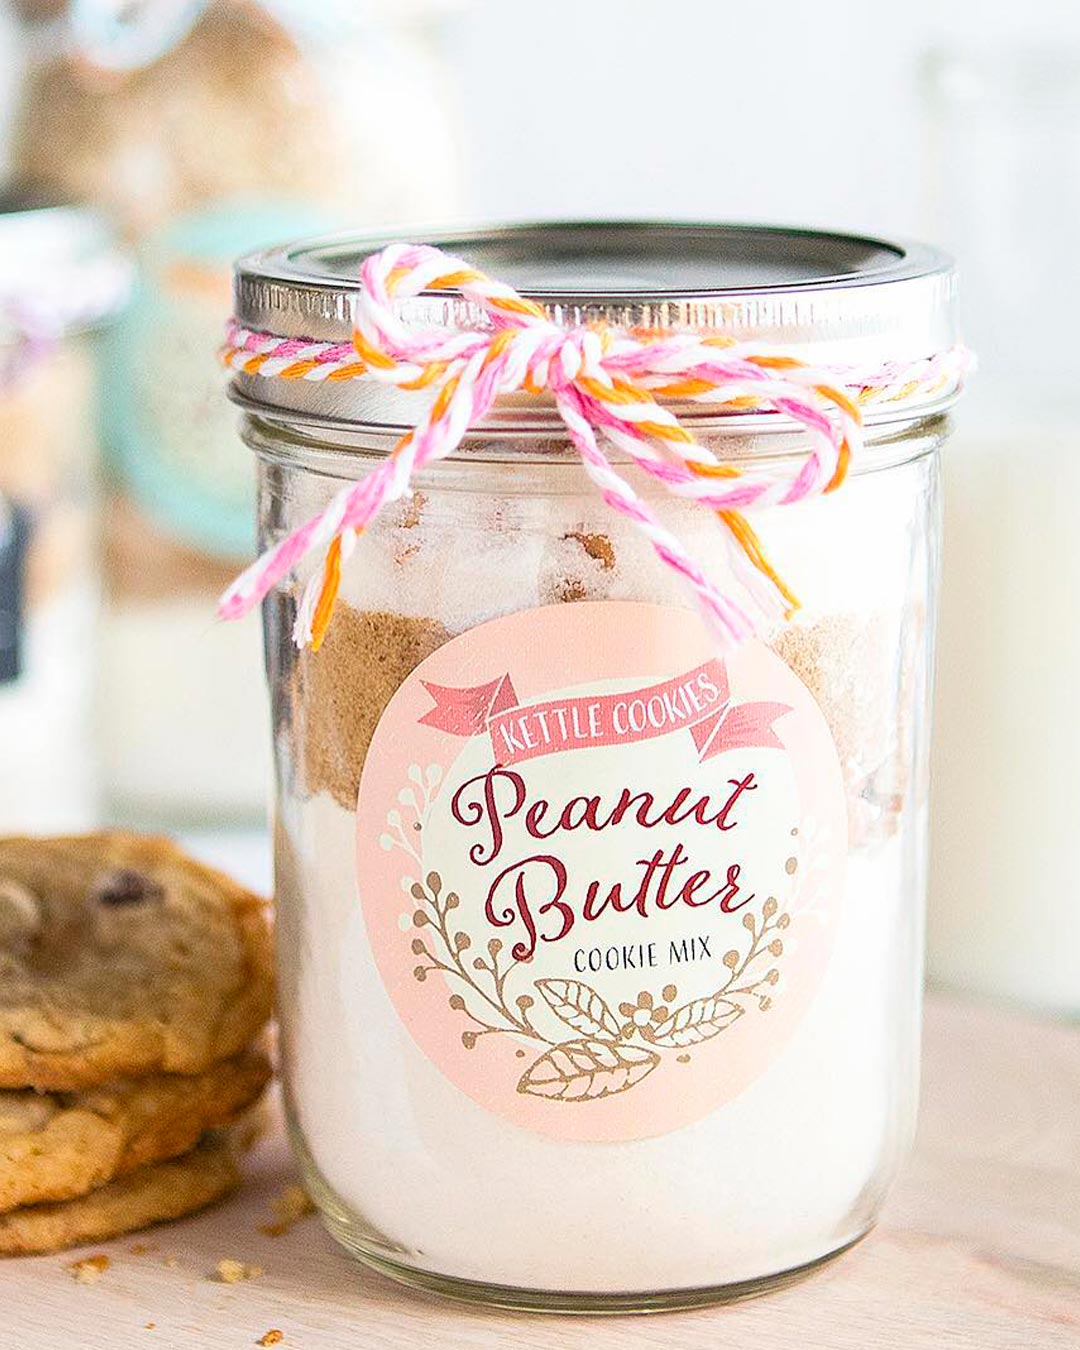 engagement gifts cookie butter mix